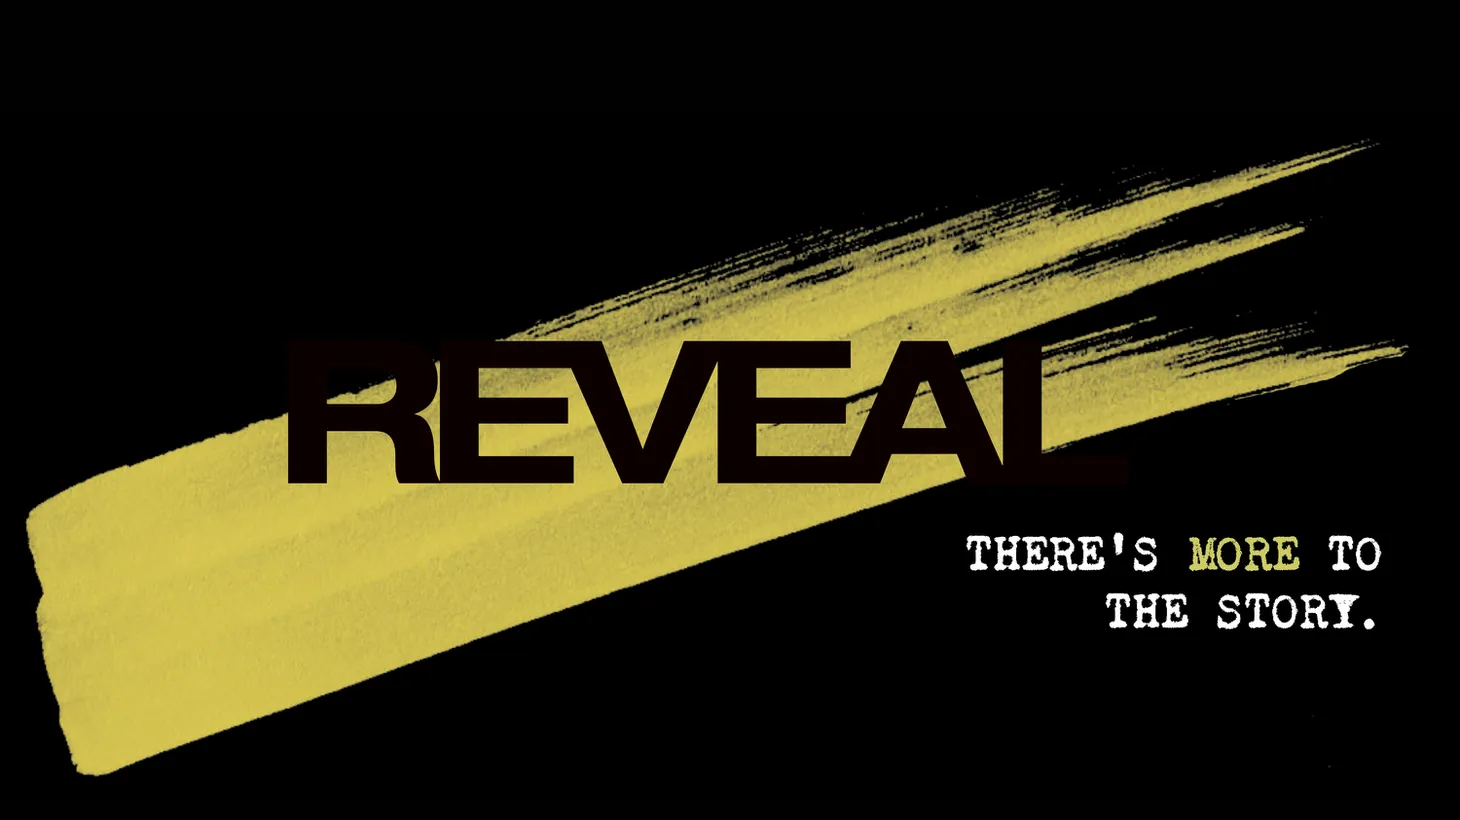 This episode of Reveal tells the story of Daniel Ellsberg, a former government strategist responsible for leaking the Pentagon Papers – thousands of classified documents that called into question America’s war in Vietnam.